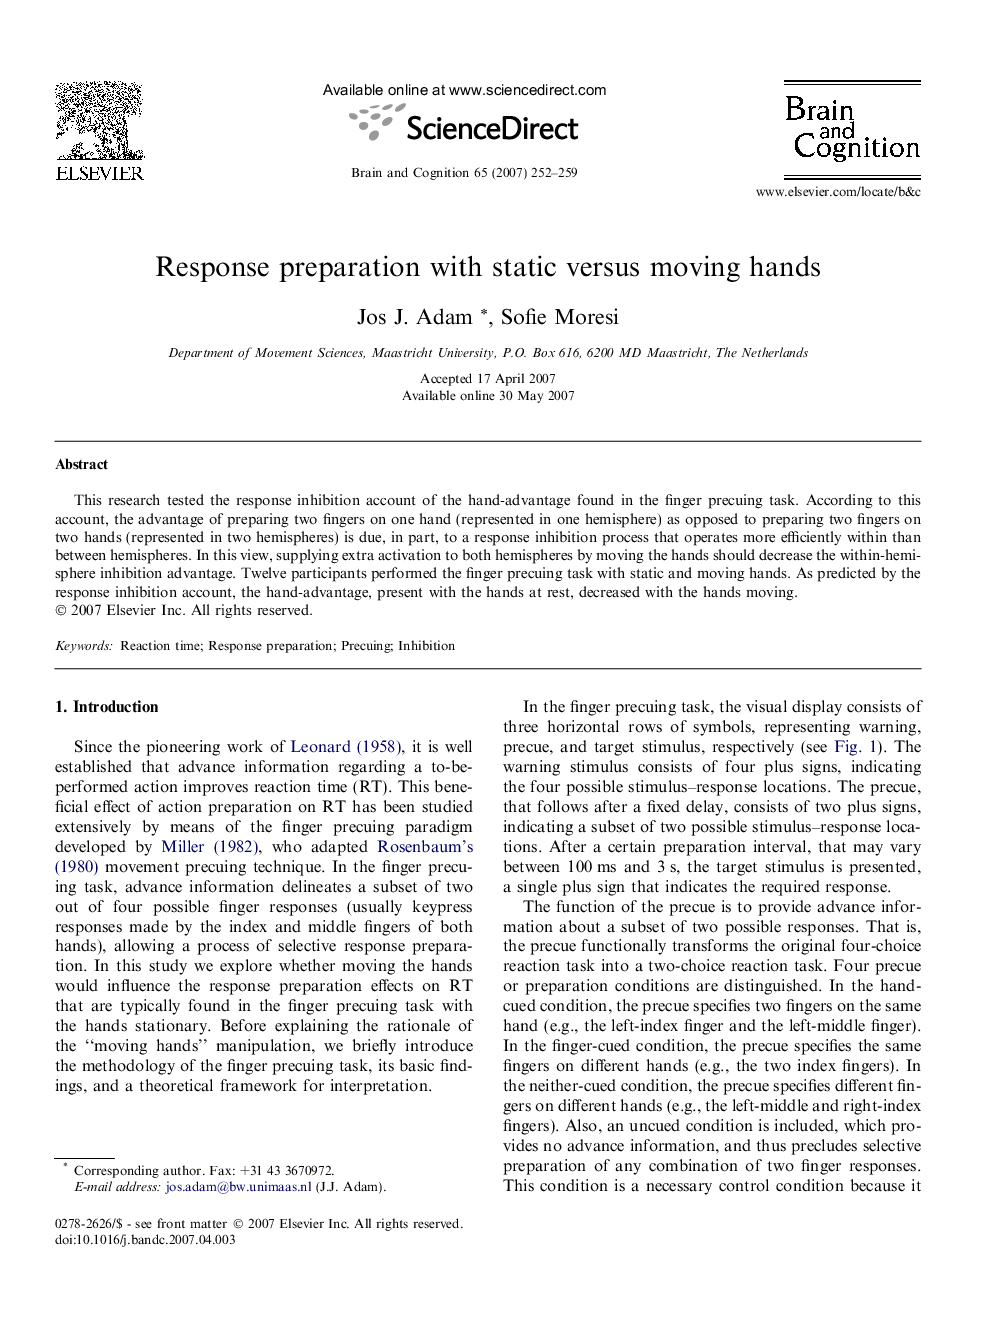 Response preparation with static versus moving hands